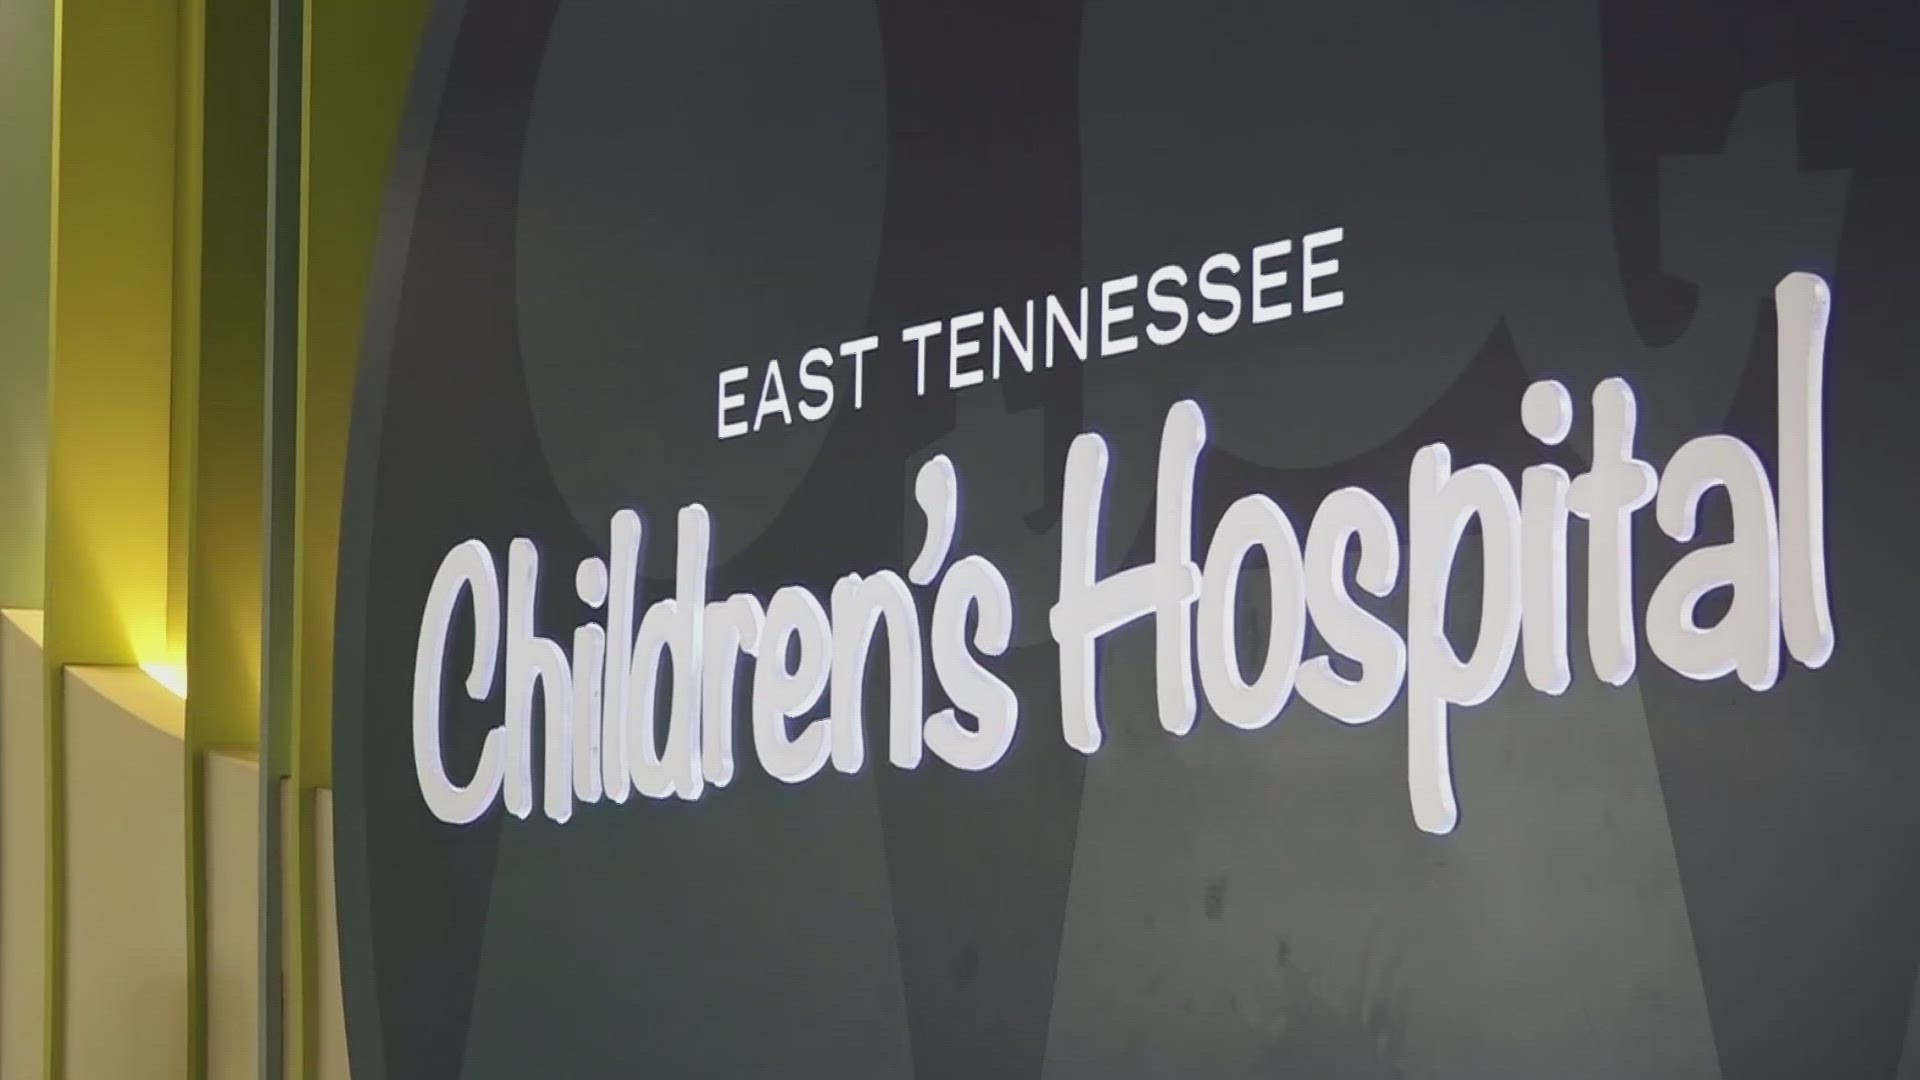 With the surge in mental and behavioral health cases among kids, the staff at East Tennessee Children's Hospital needs support to manage their own well-being.